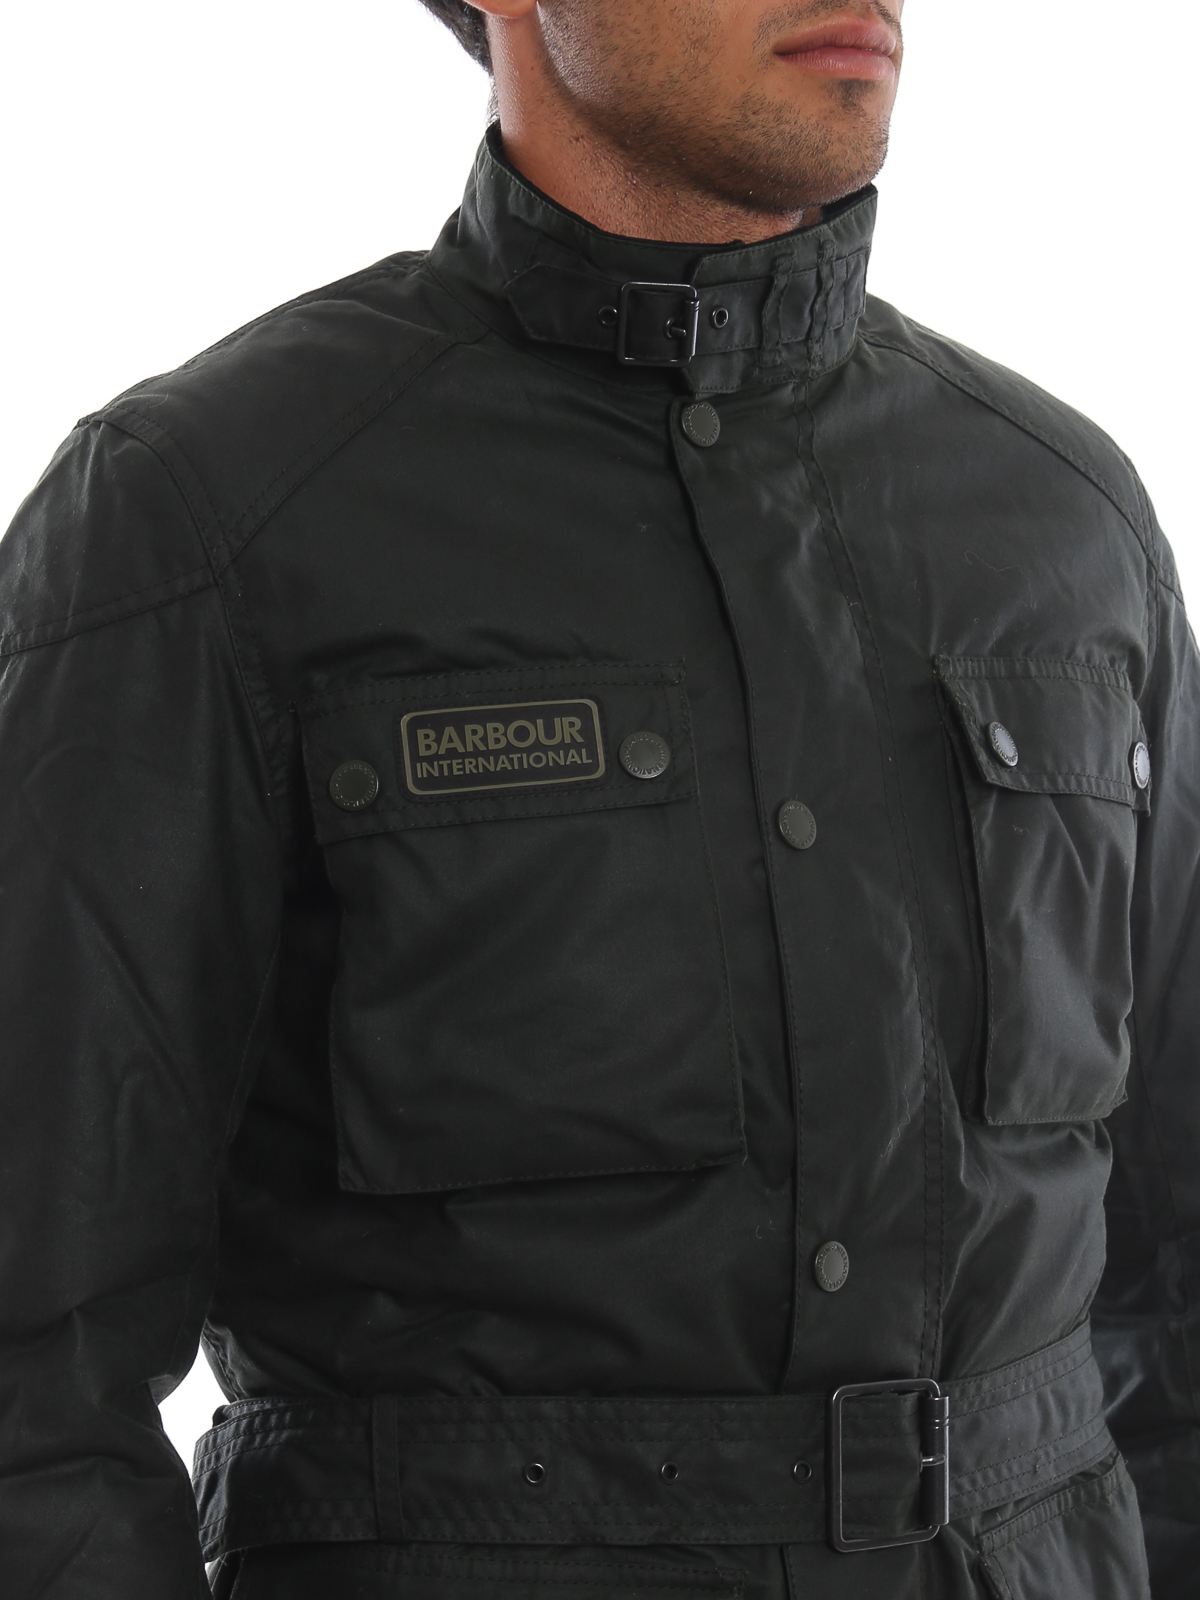 barbour blackwell jacket